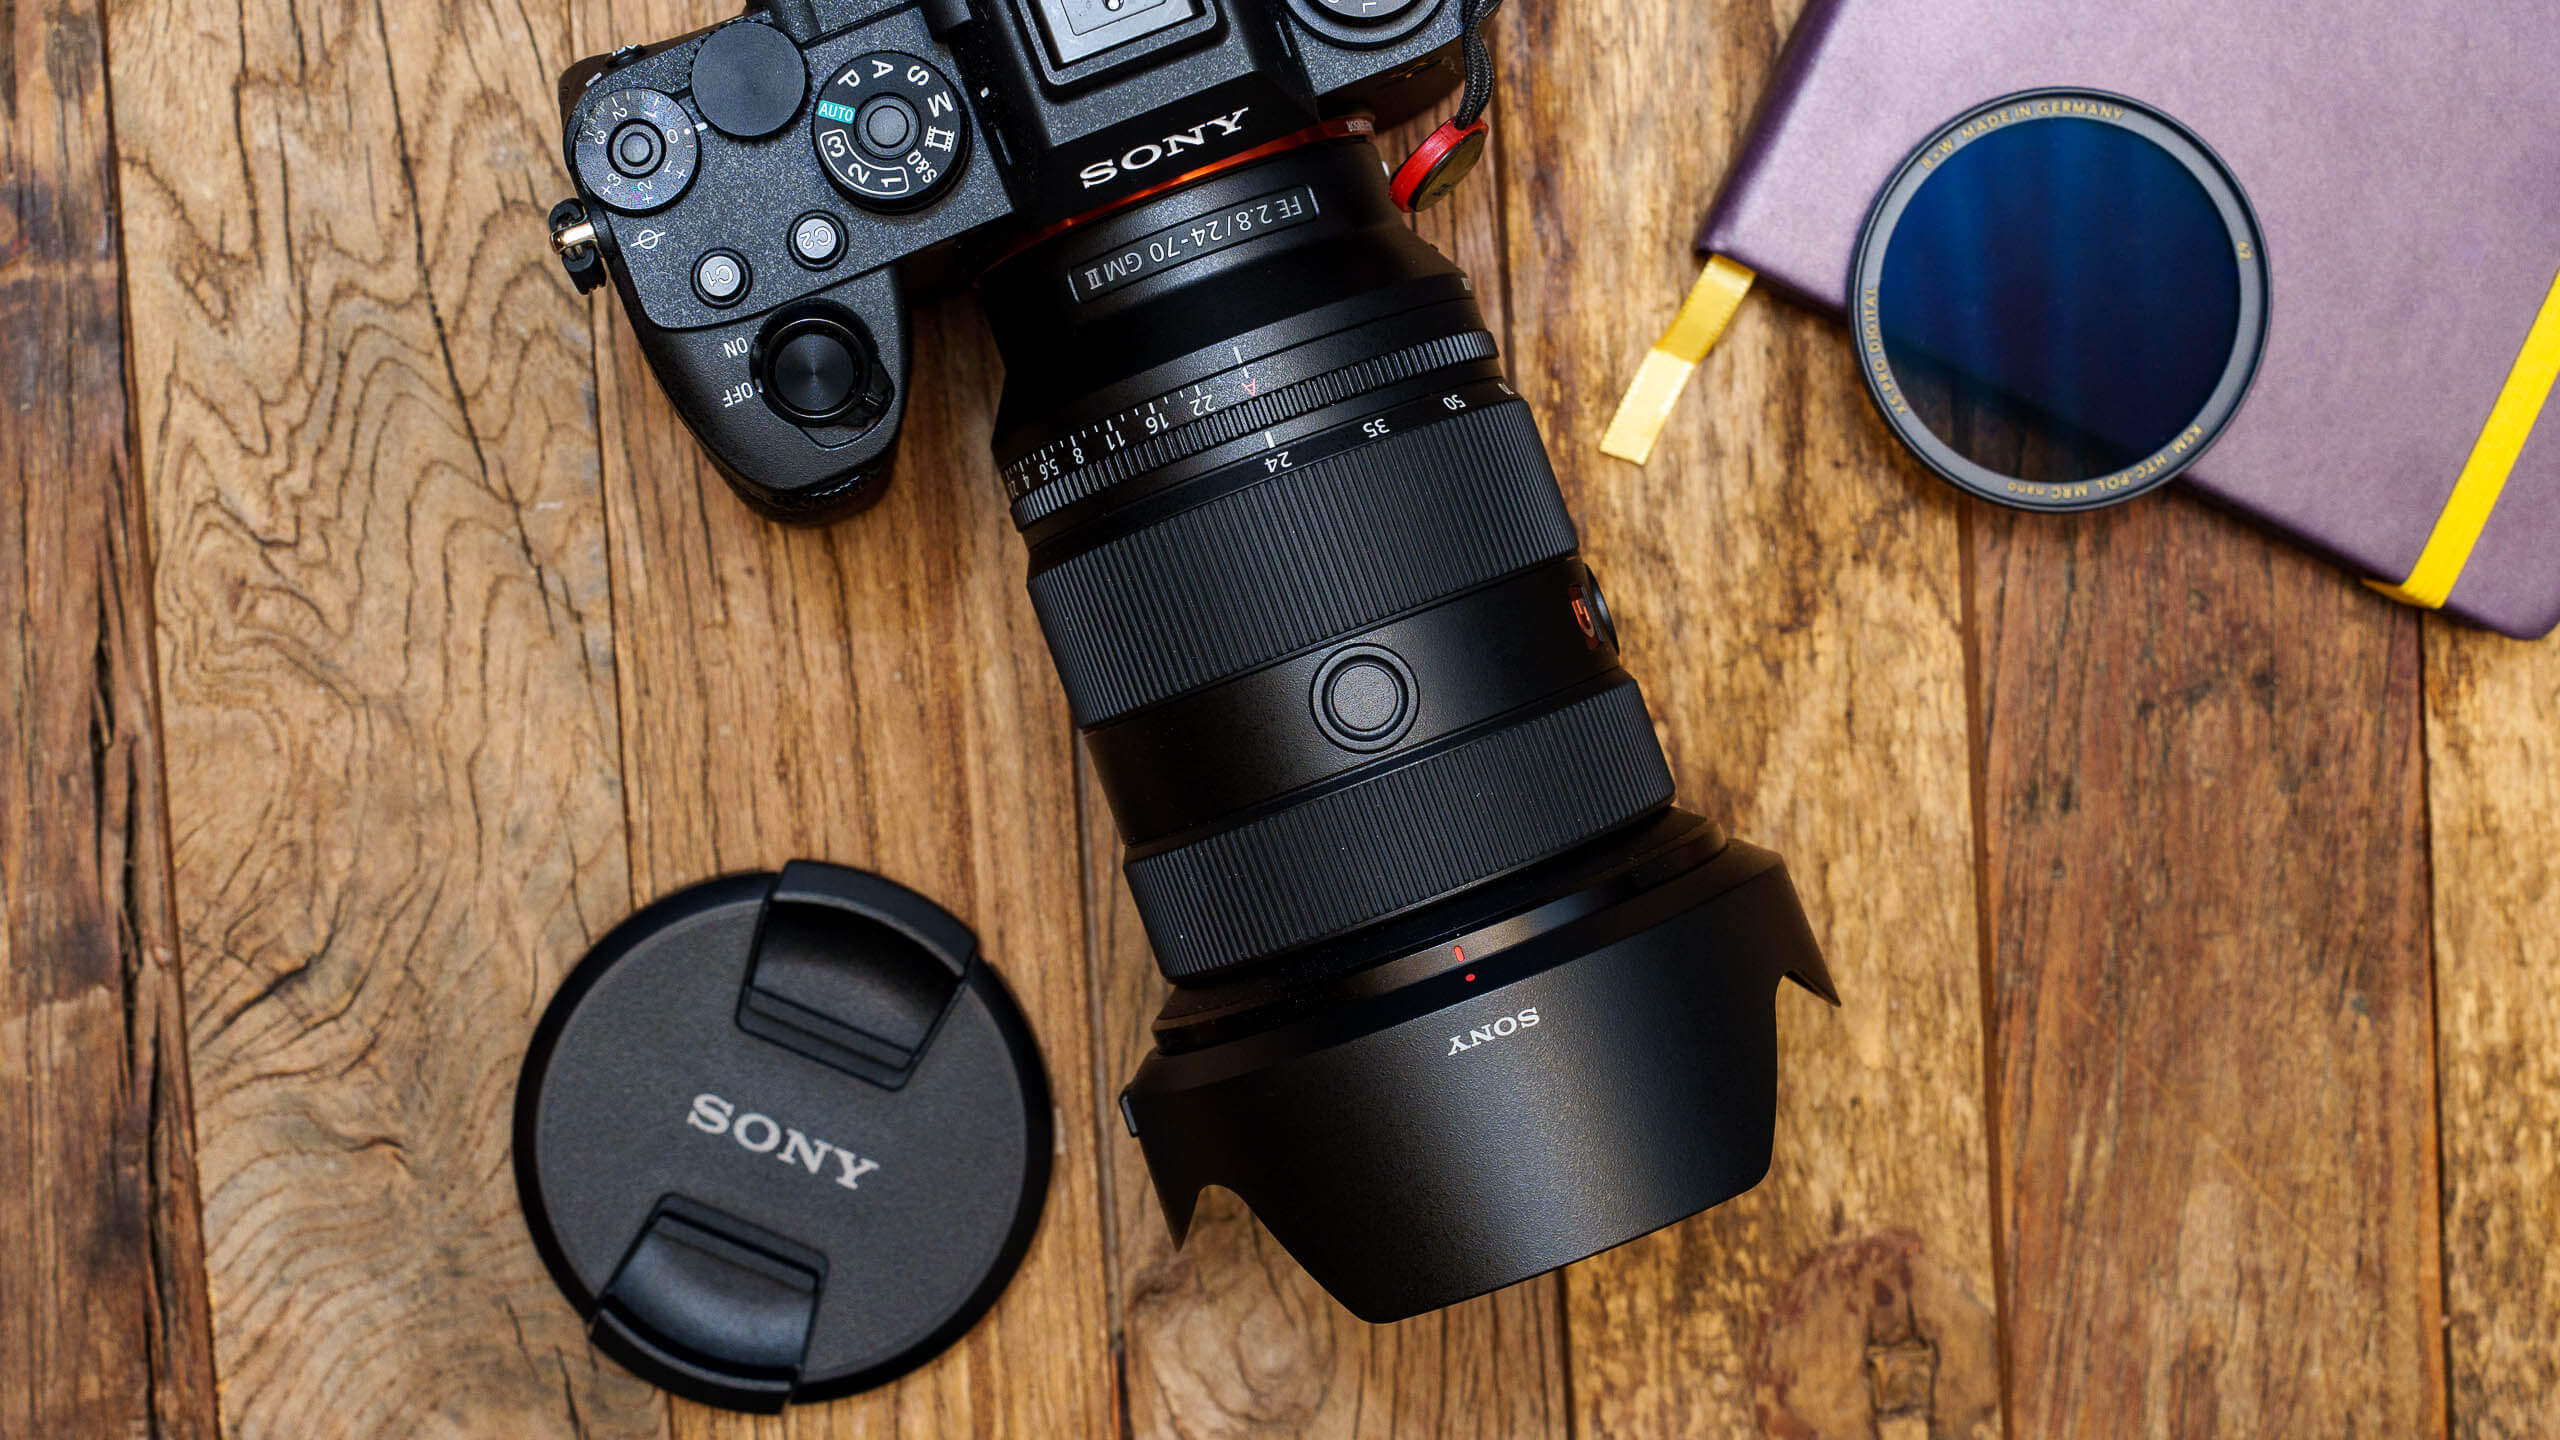 Sony 24-70mm f/2.8 GM II review: A lens you can rely on - Photofocus